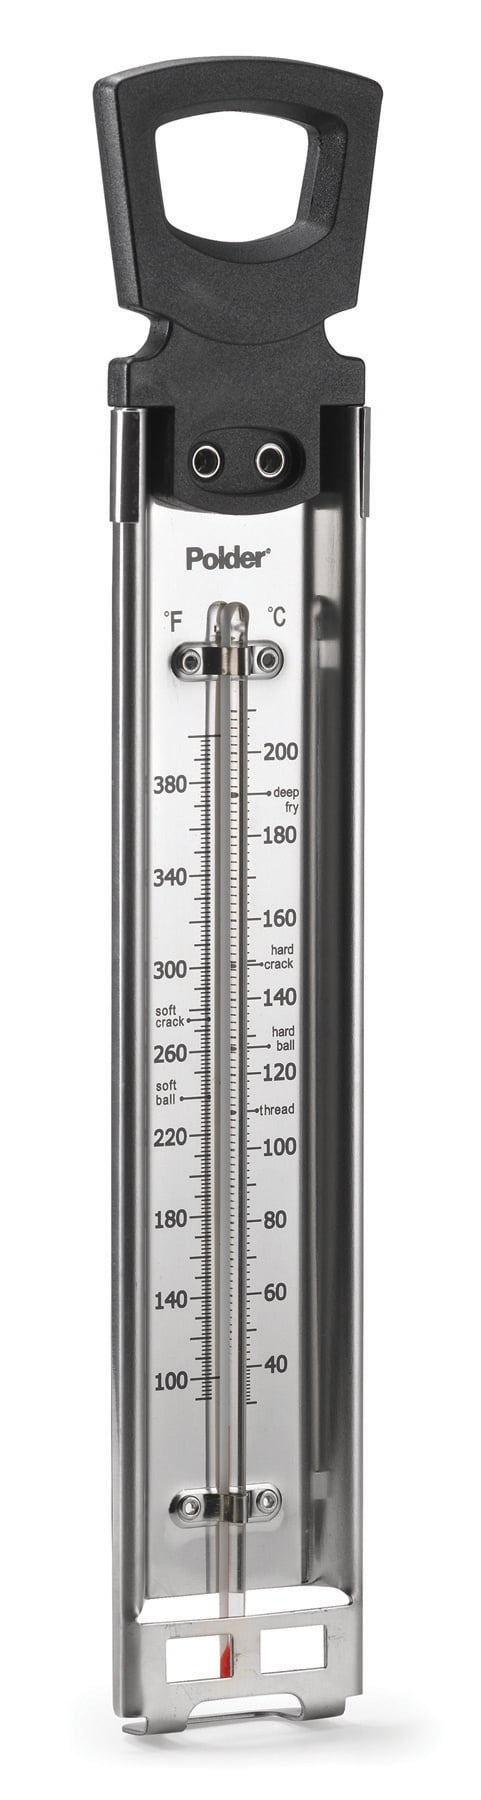 Polder Candy Thermometer 